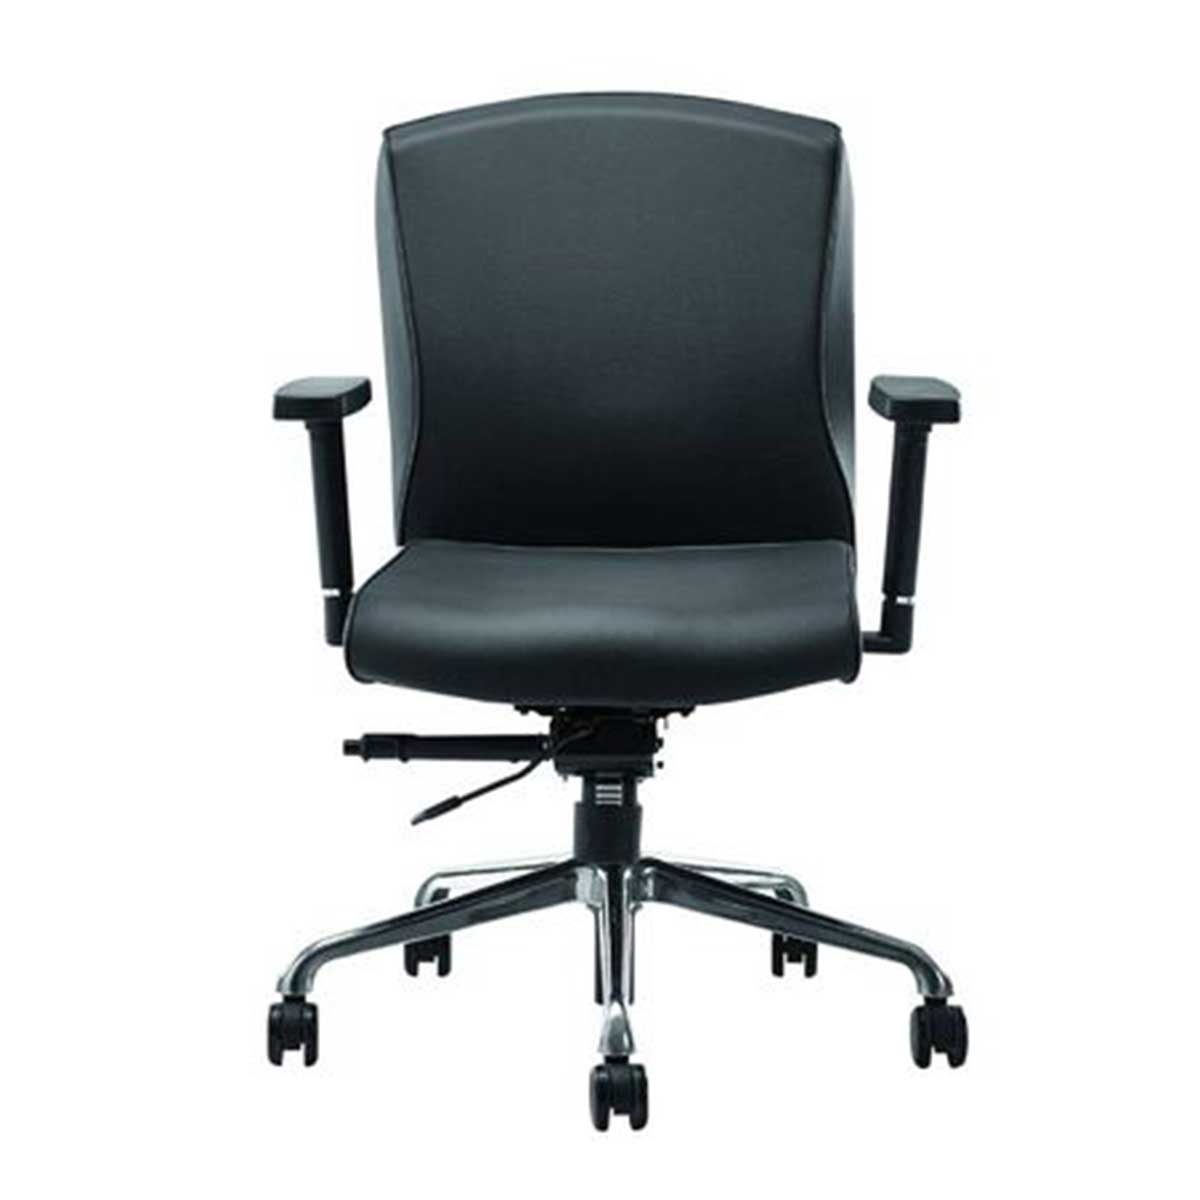 Low Back Office Chair Manufacturers, Suppliers in Nirman Vihar